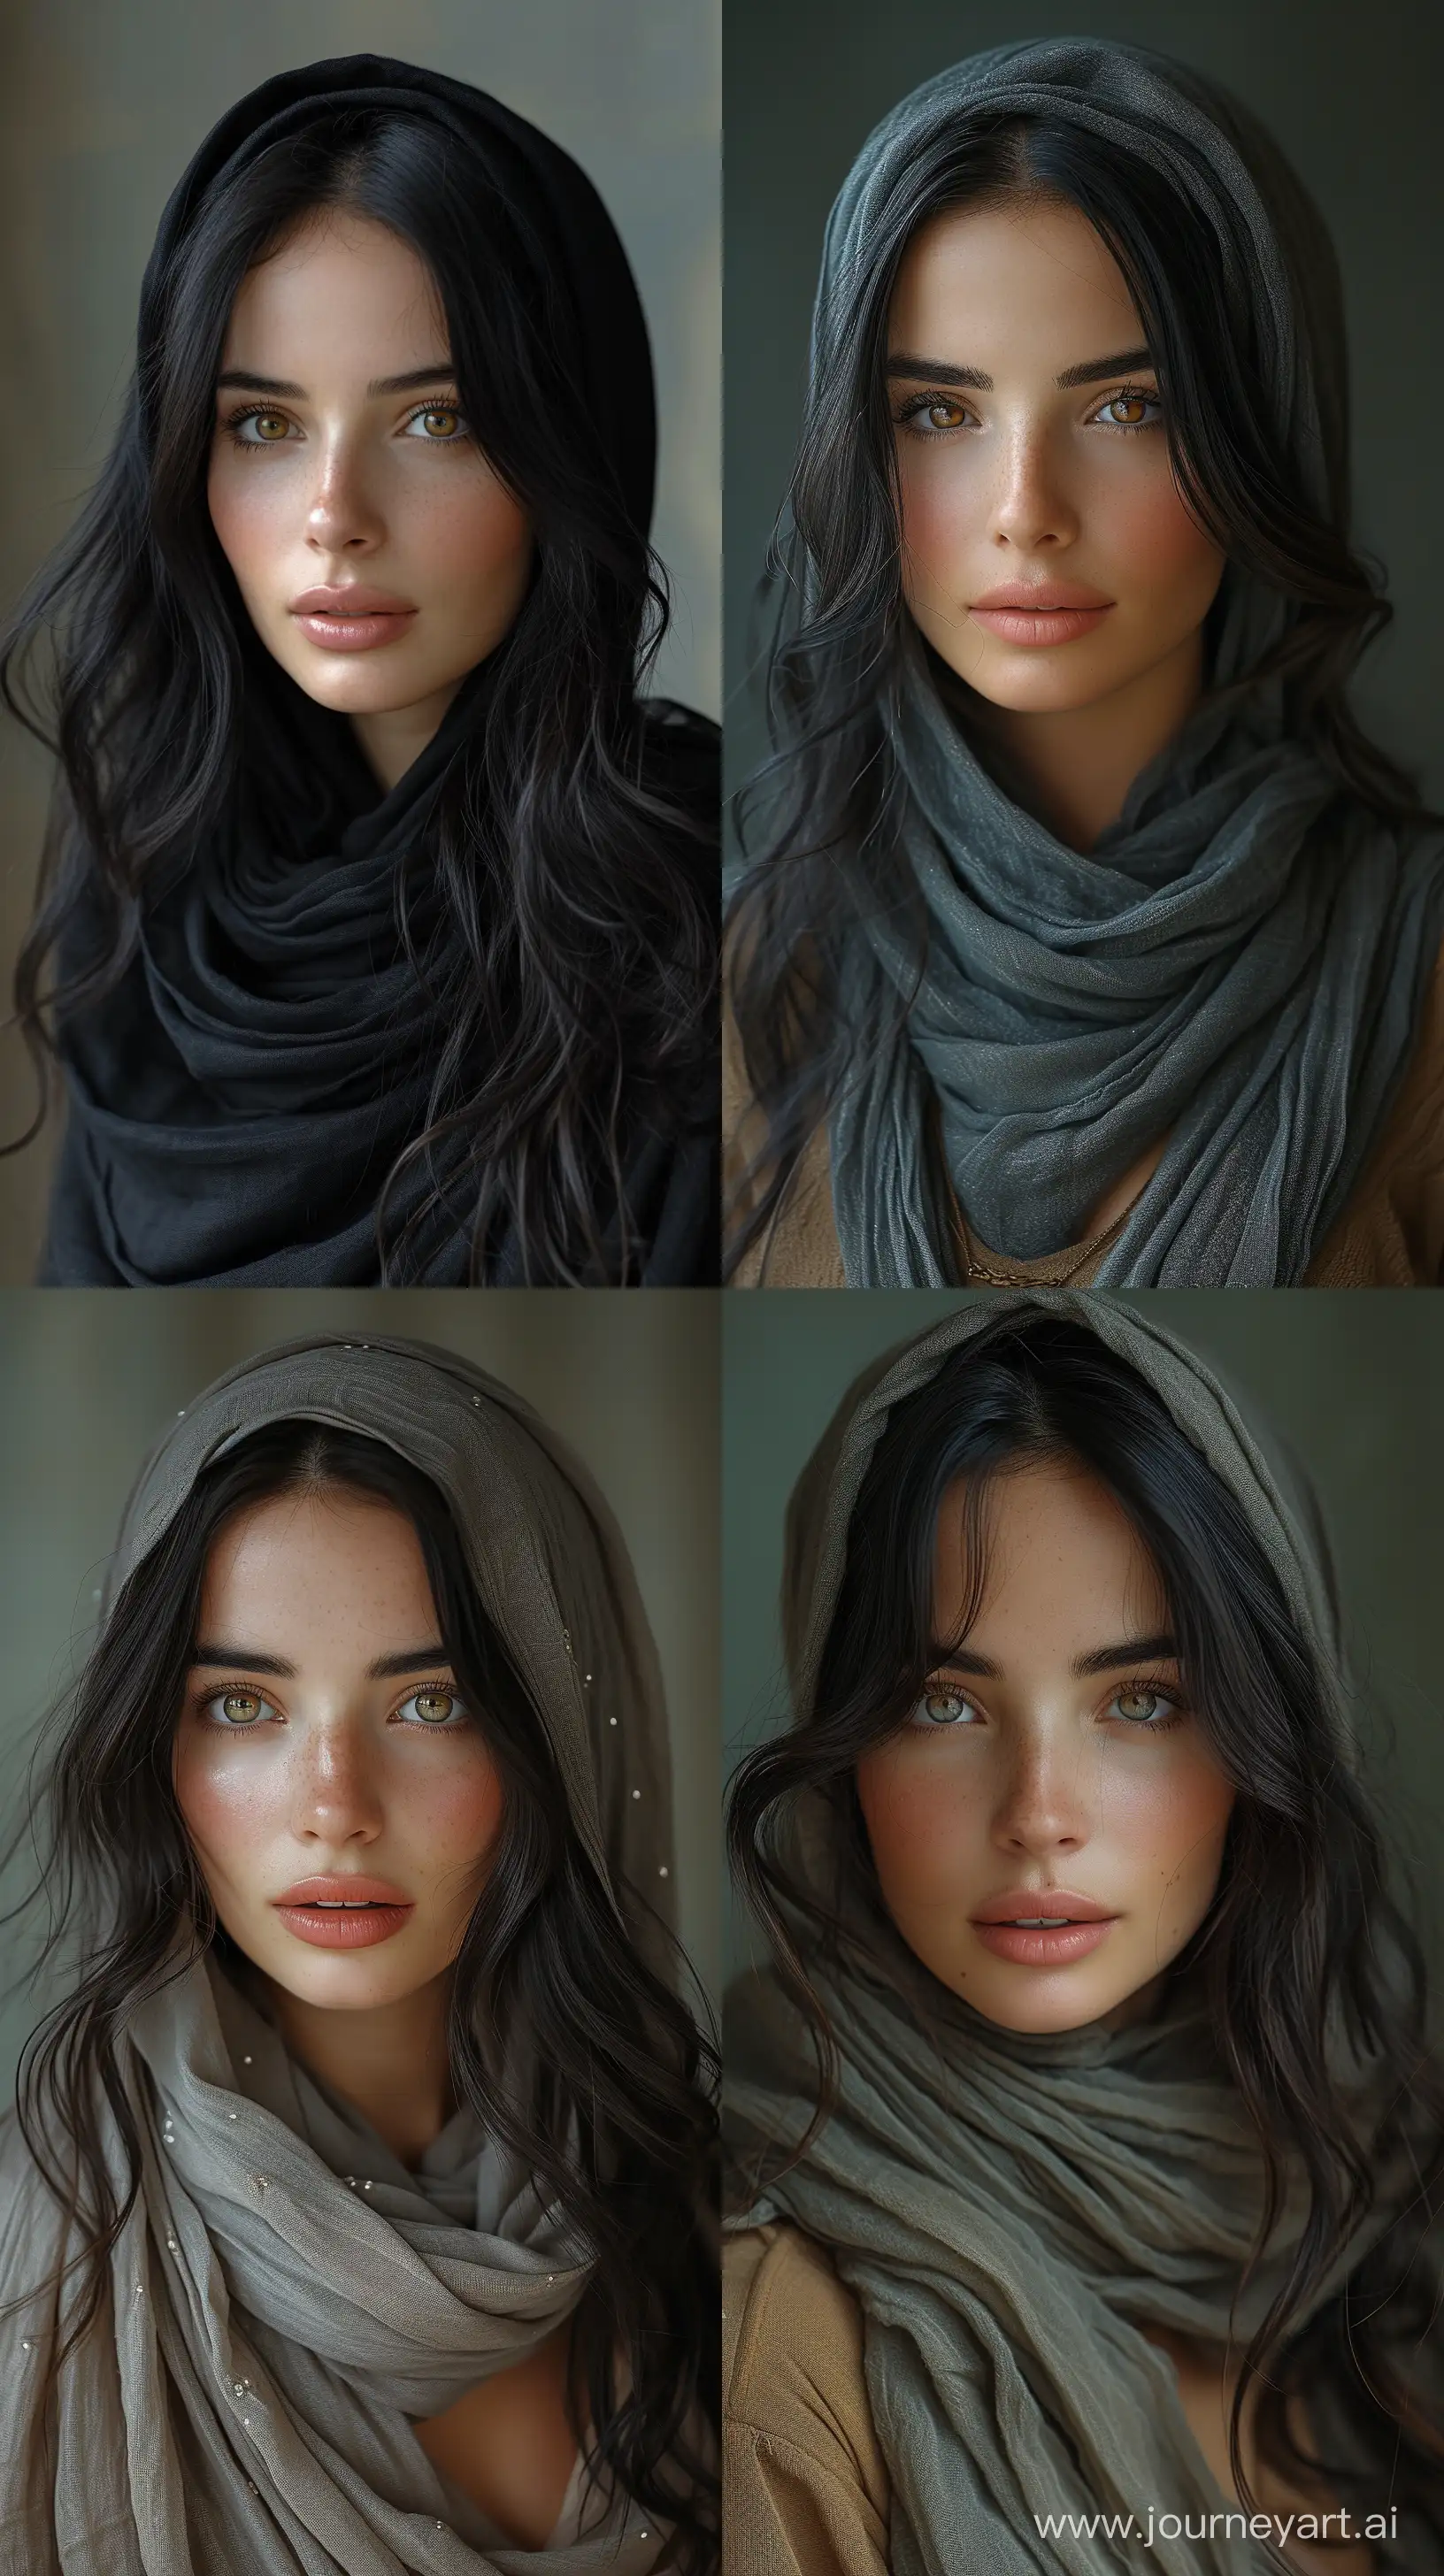 Innocent-Elegance-Iranian-Woman-with-Long-Wavy-Hair-and-Hijab